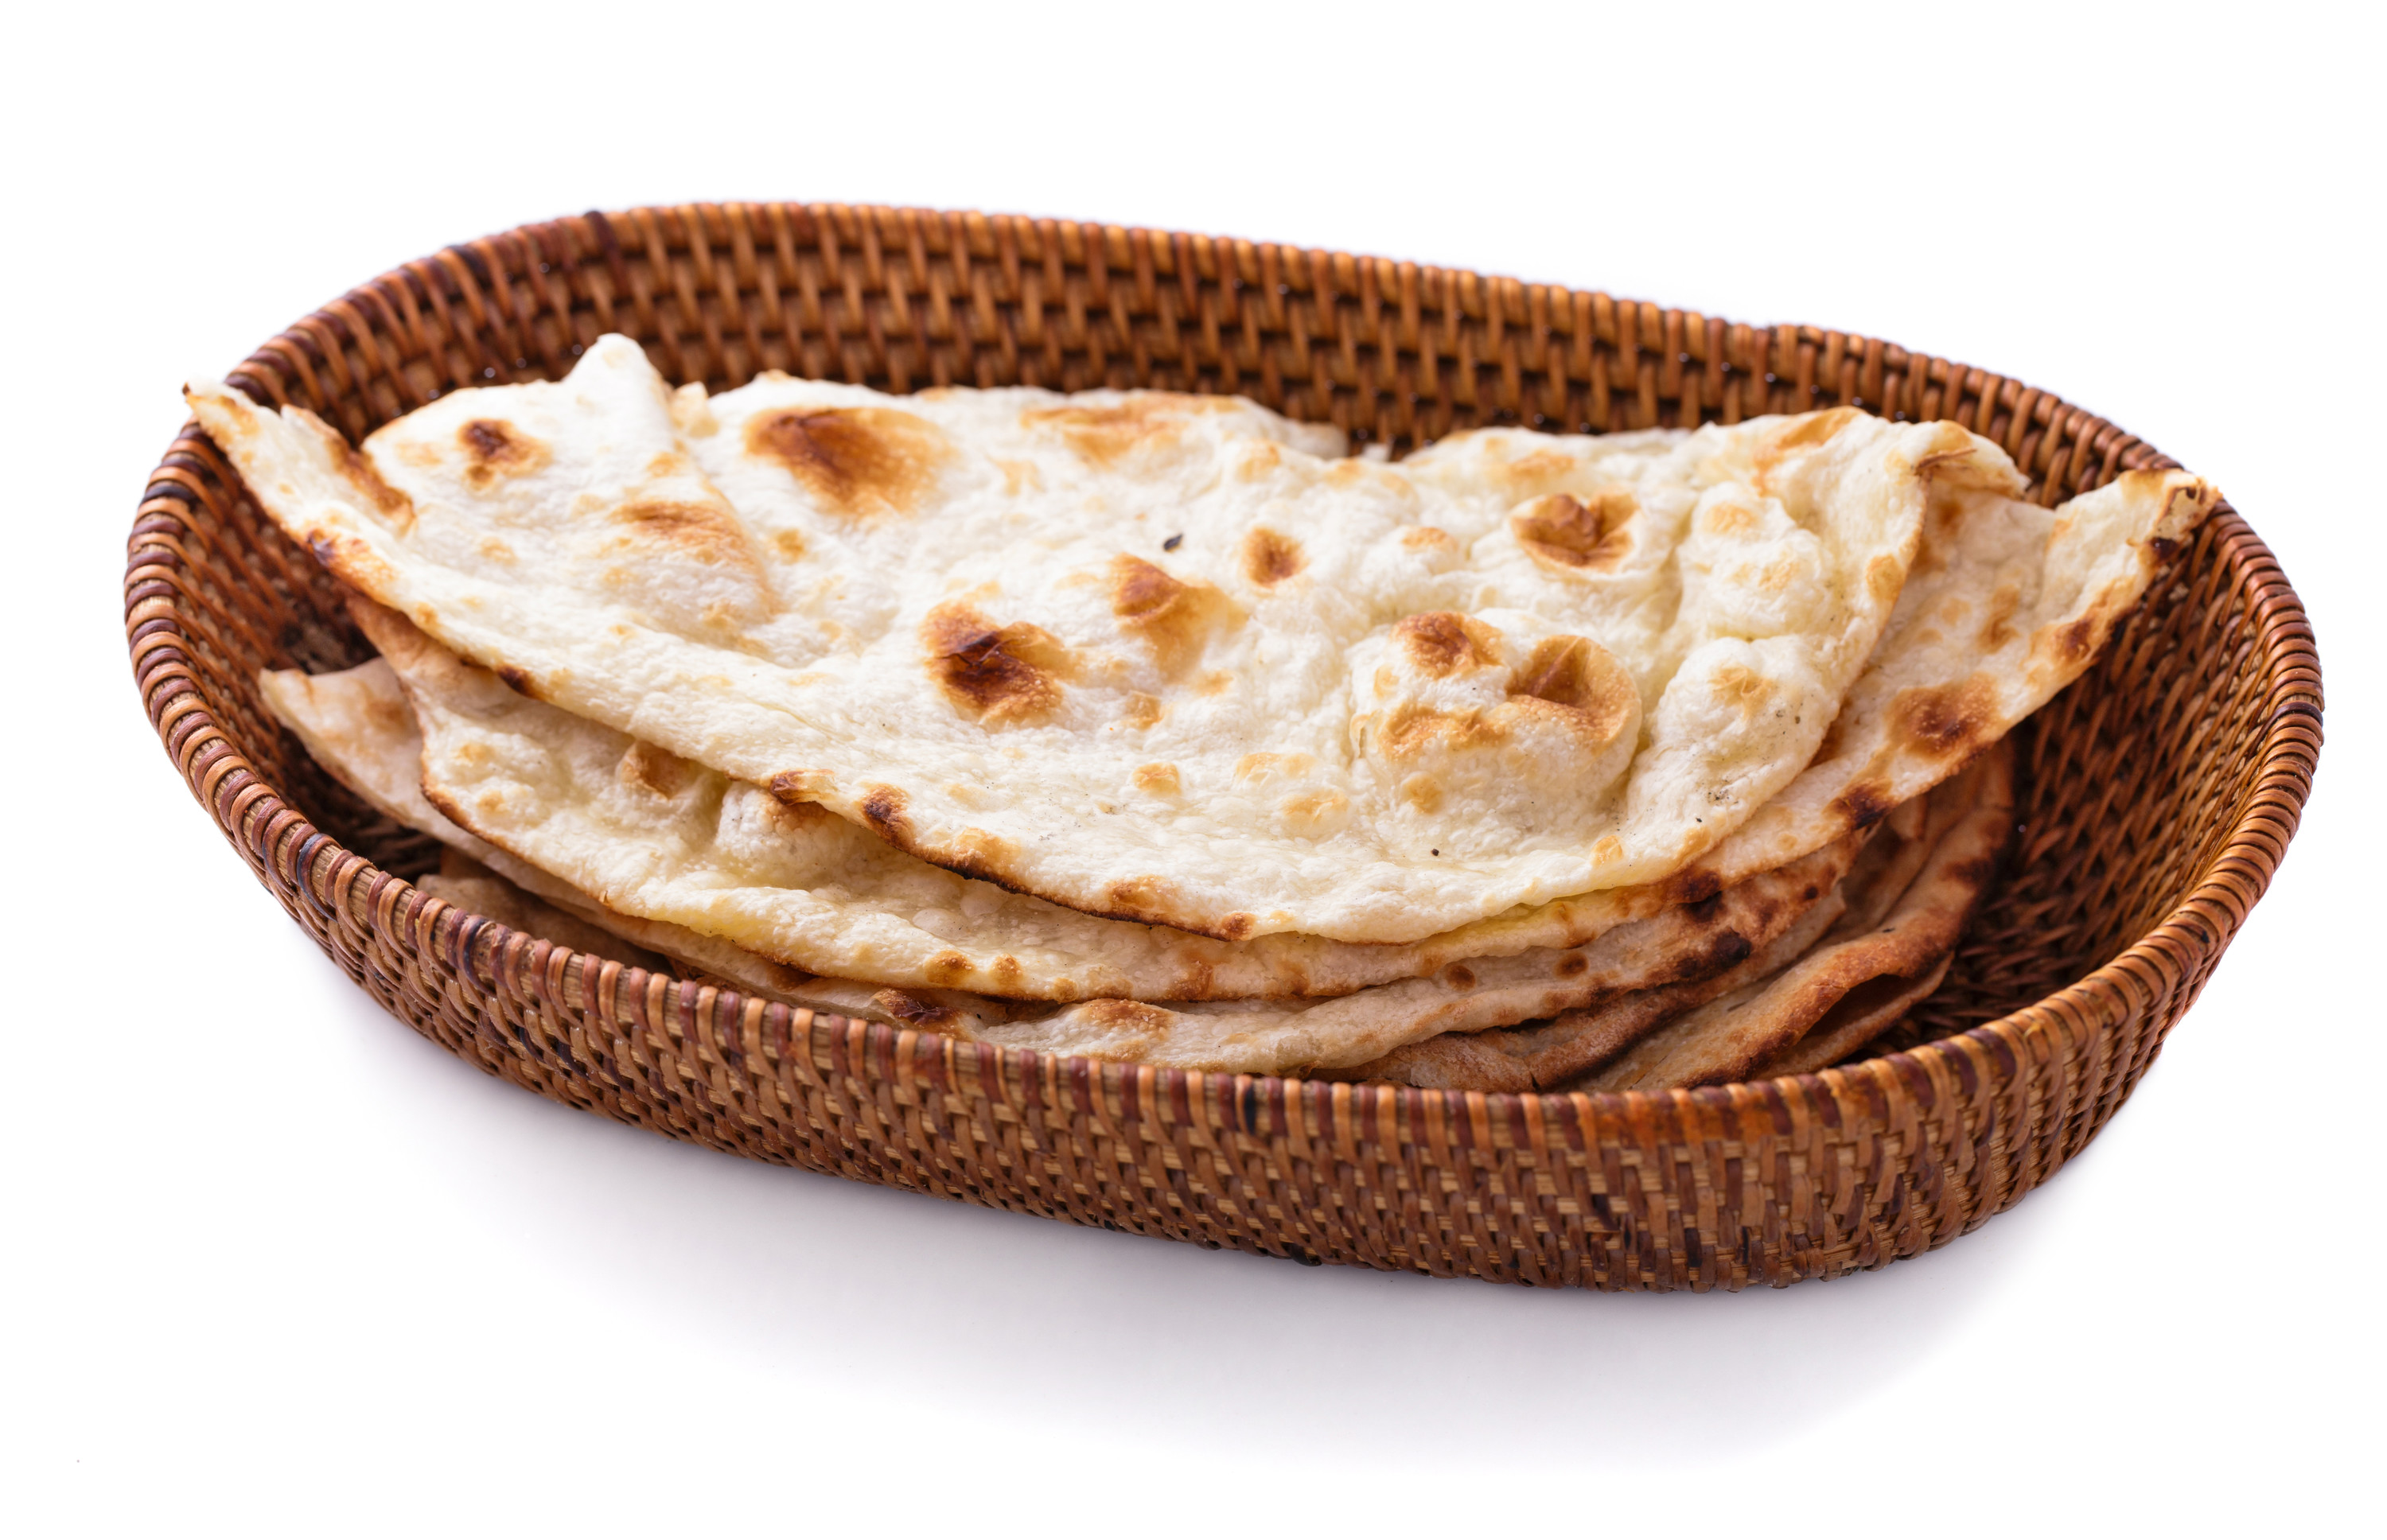 Image of naan